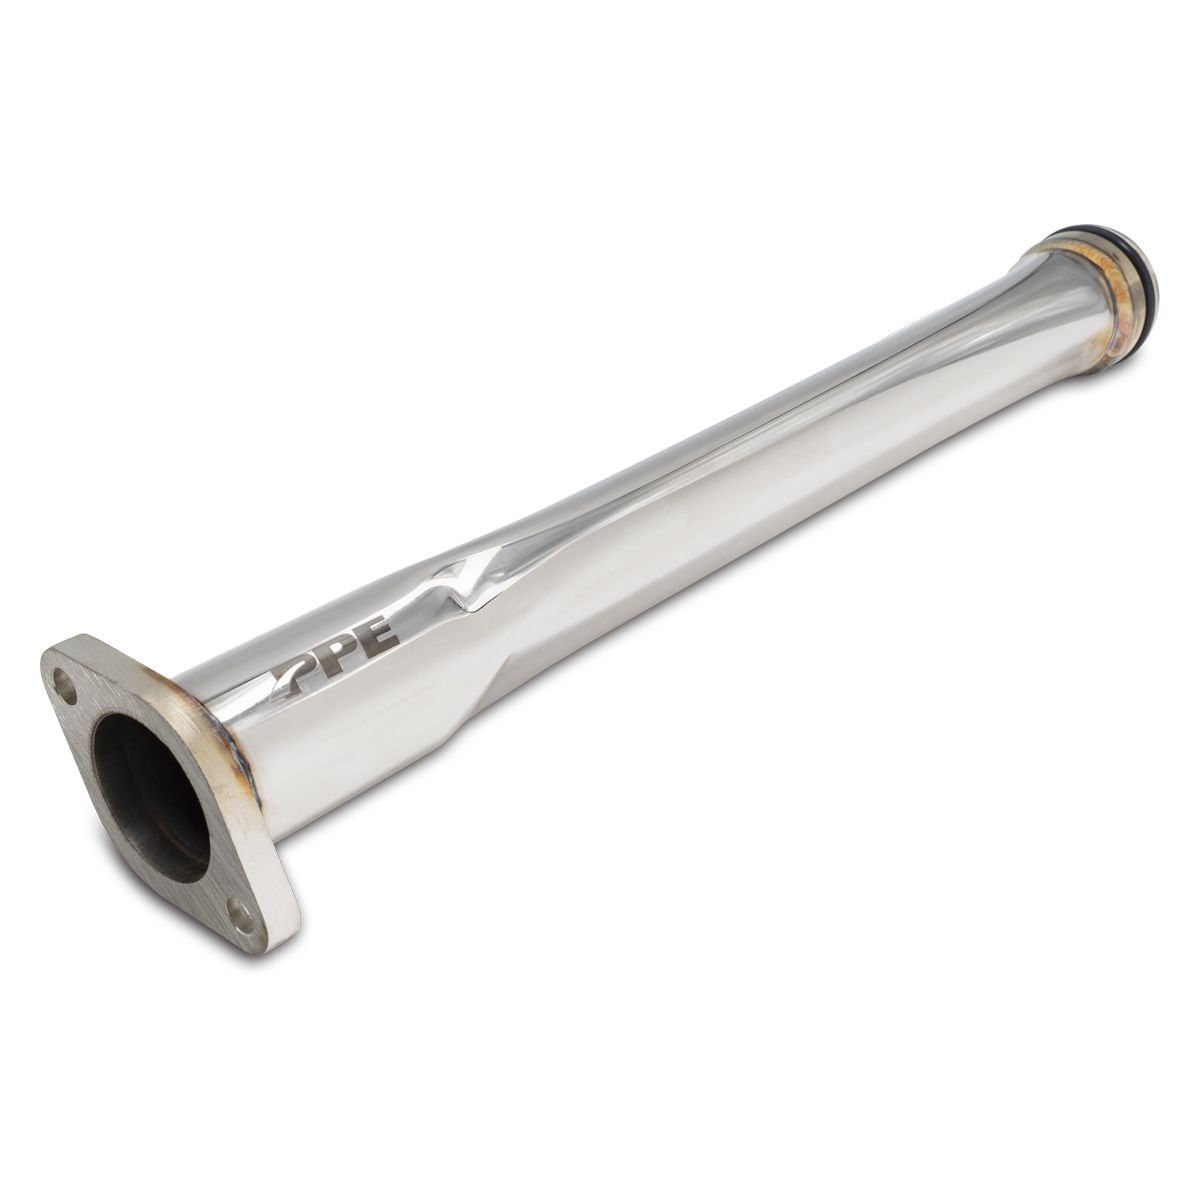 PPE - PPE Performance 304 Stainless Steel Pump To Oil Cooler Coolant Tube (Polished) - For 01-20 6.6 Duramax